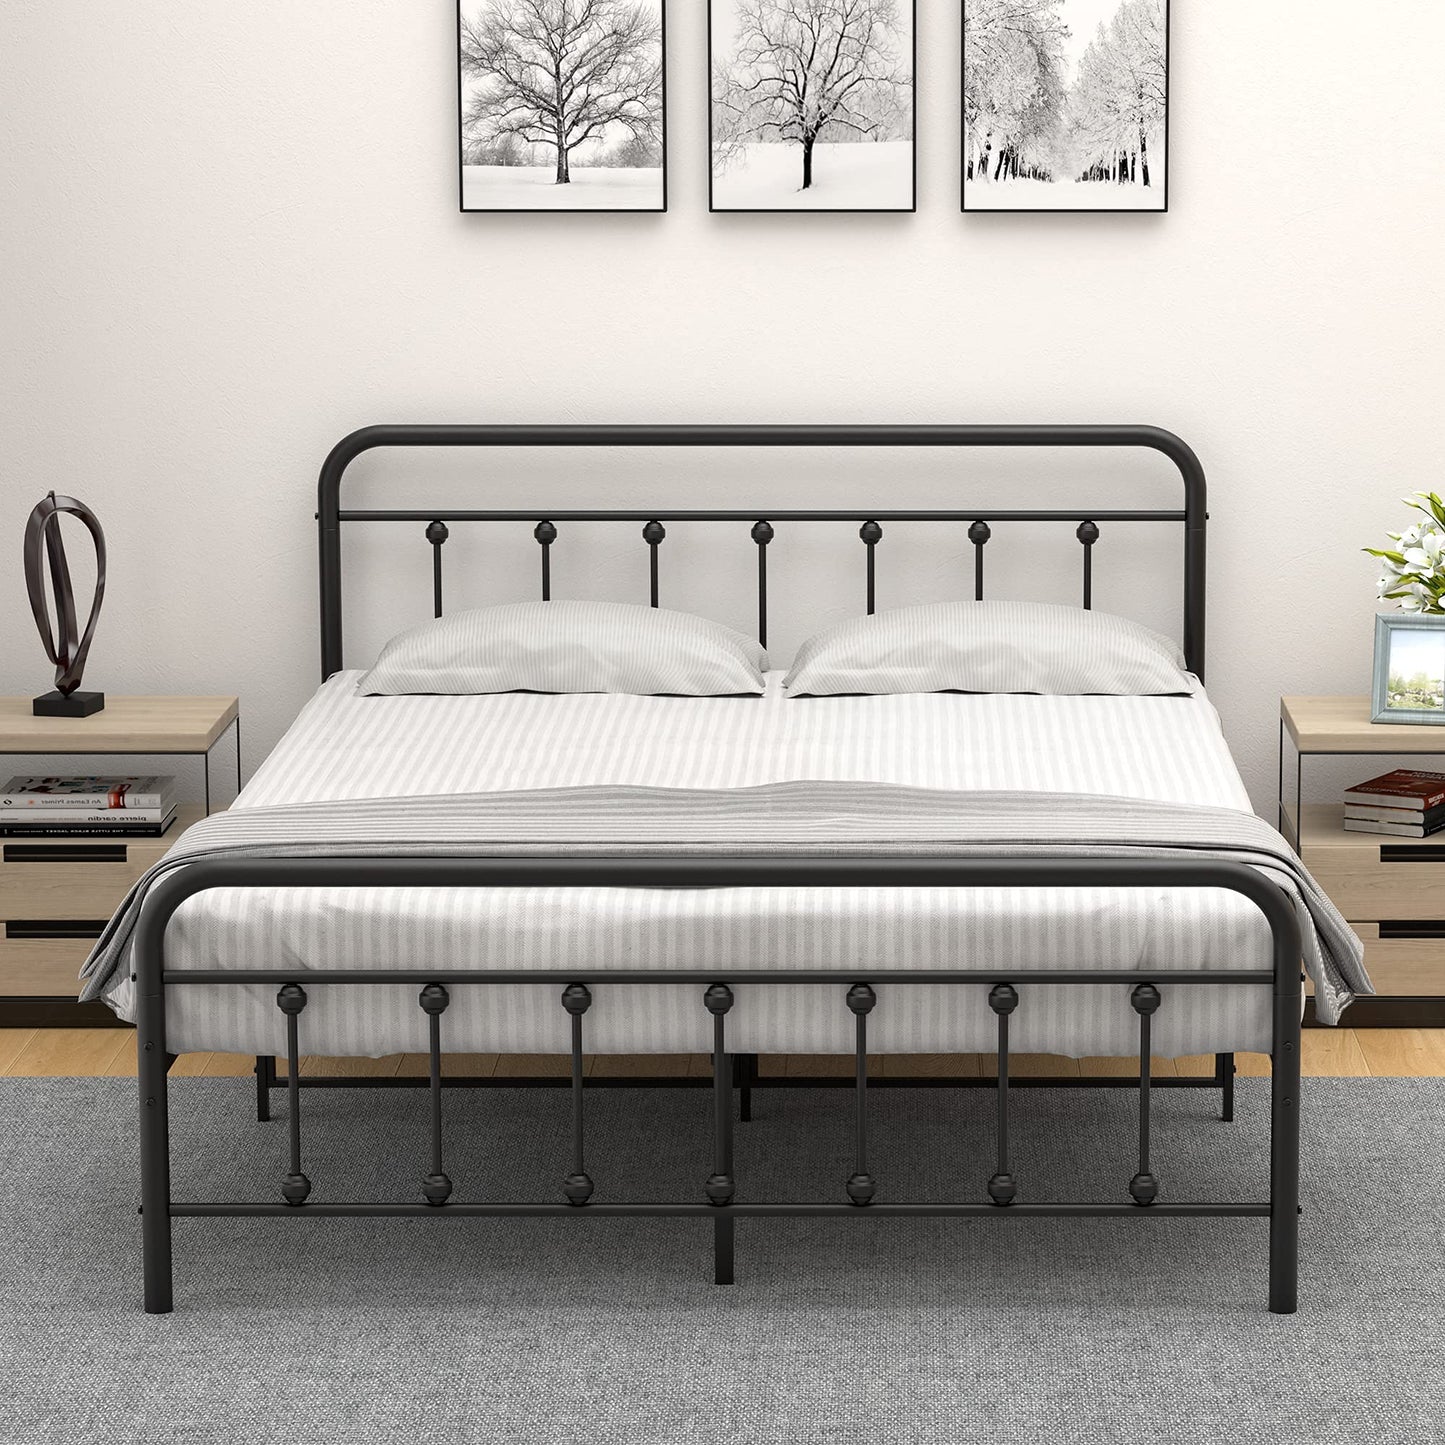 IDEALHOUSE Queen Size Metal Bed Frame with Victorian Headboard